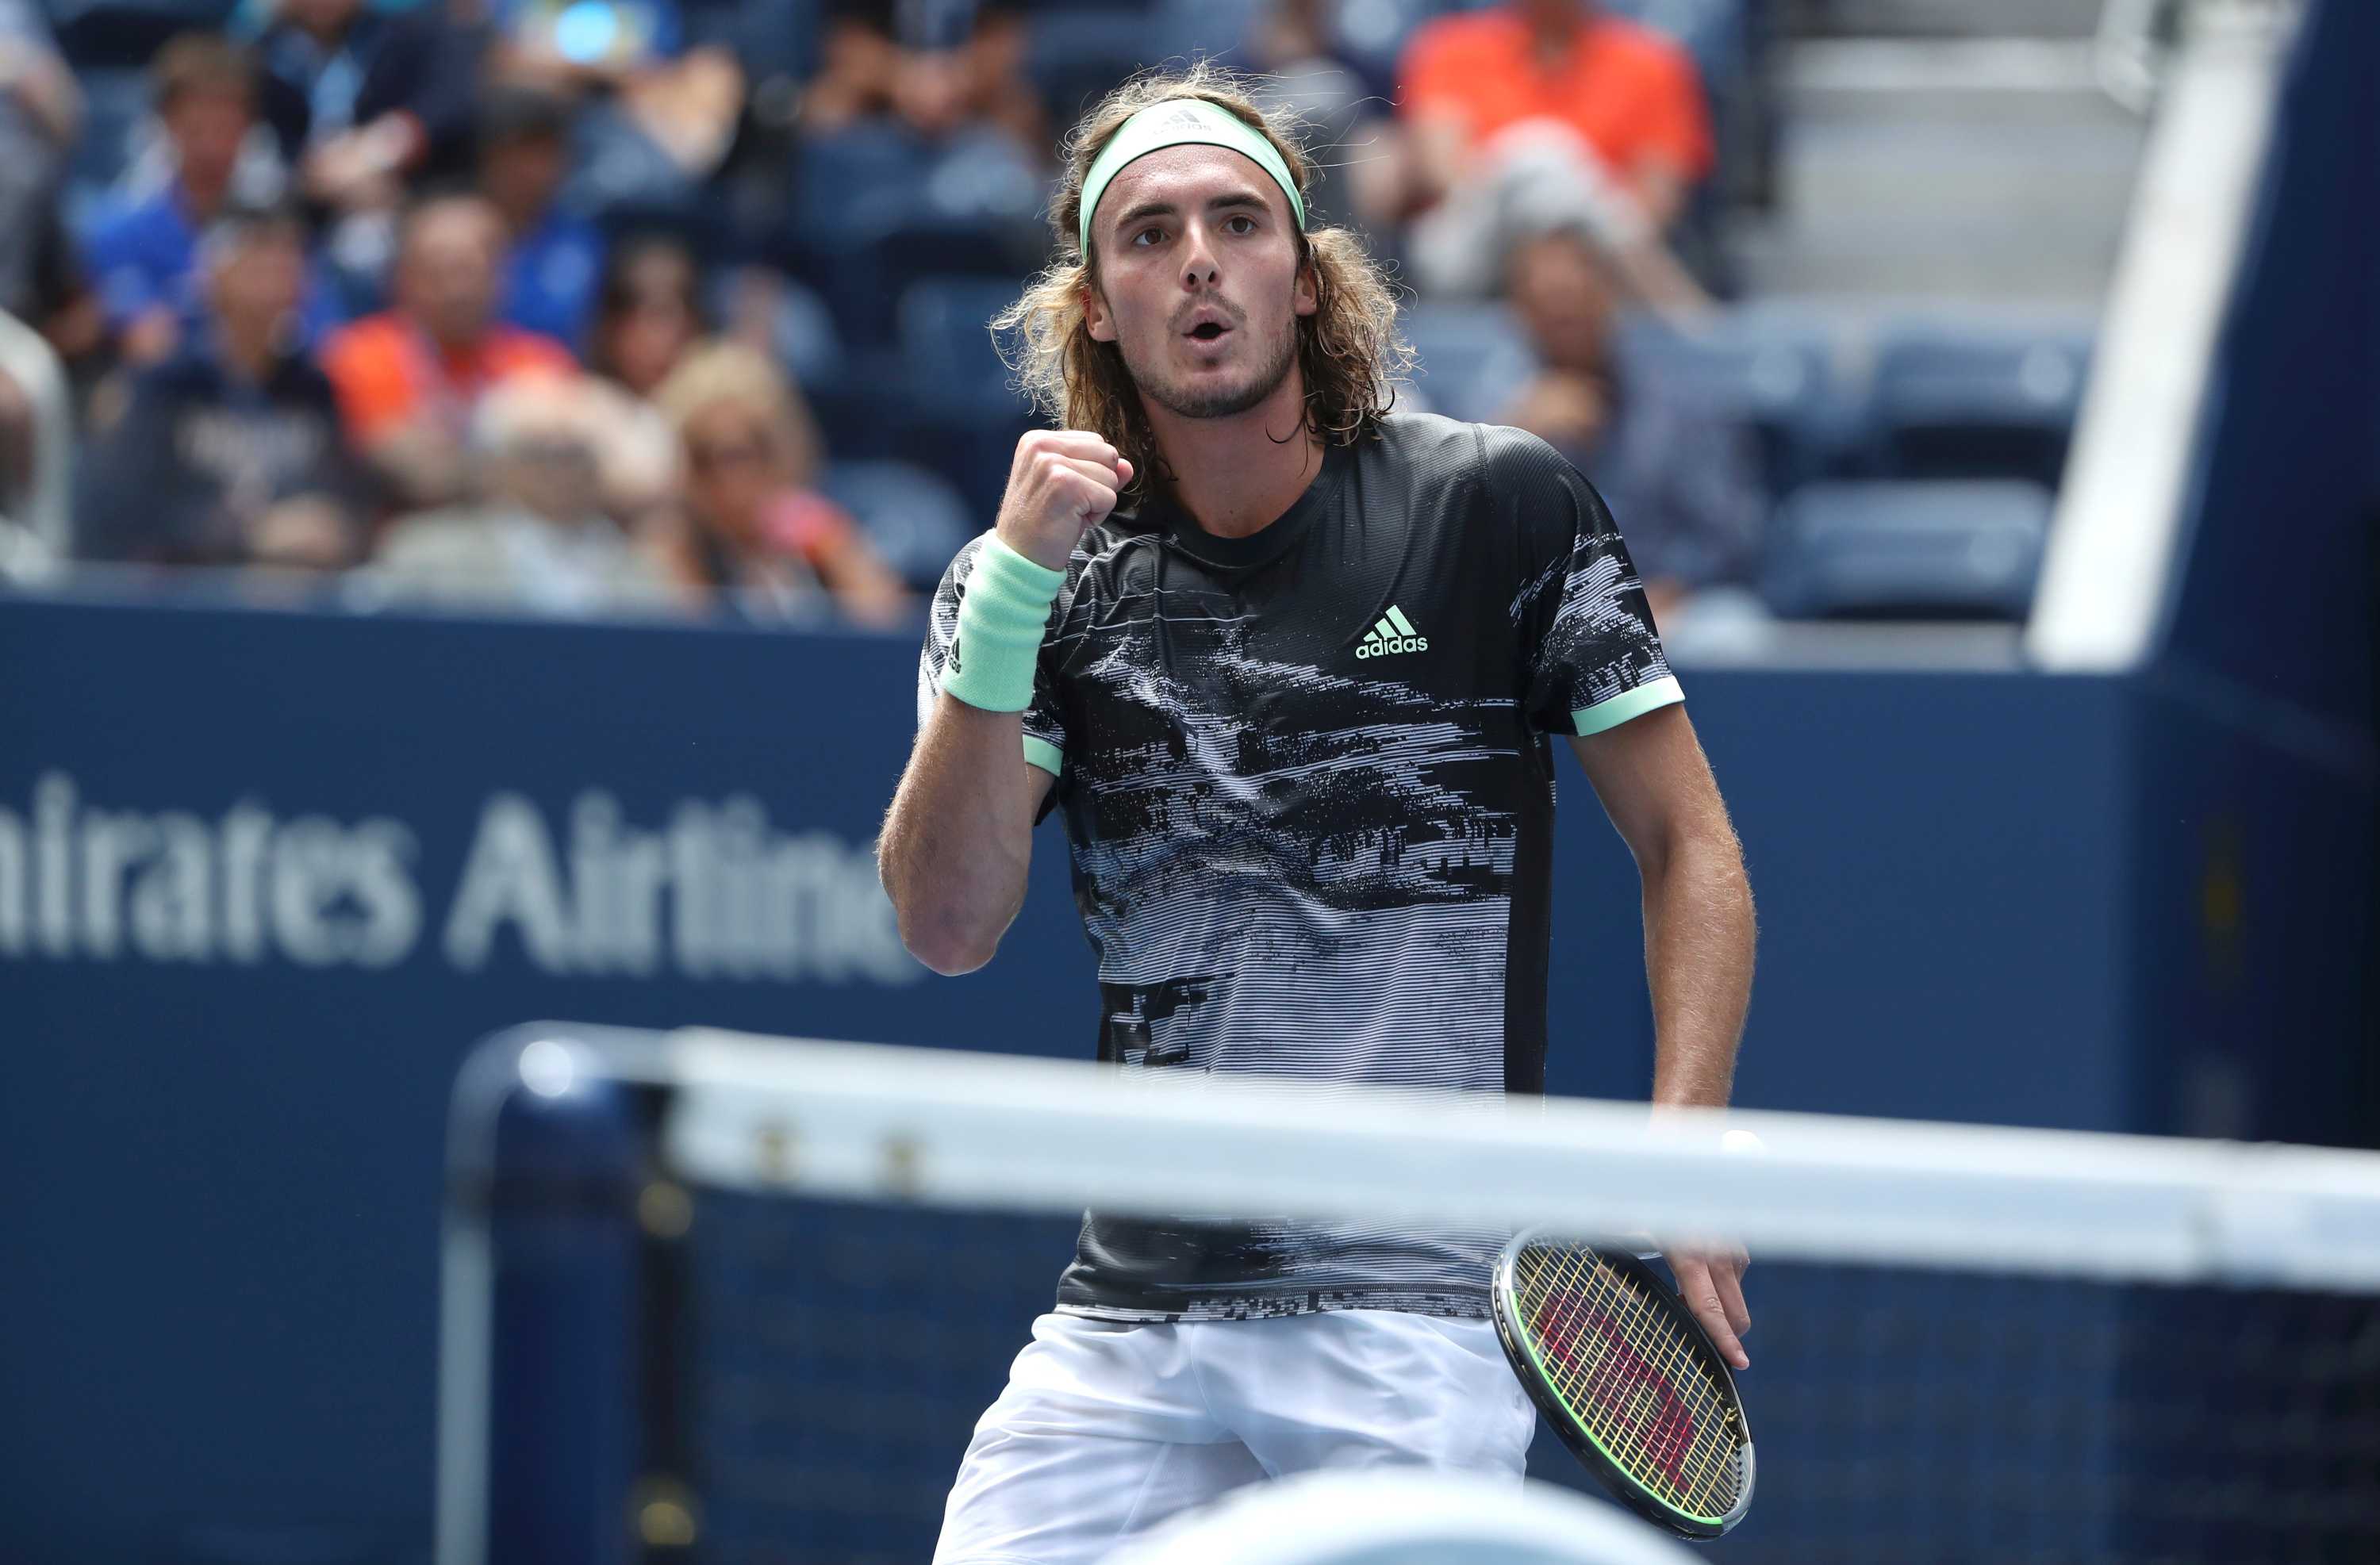 US Open umpire labelled a weirdo as Stefanos Tsitsipas bows out in first round